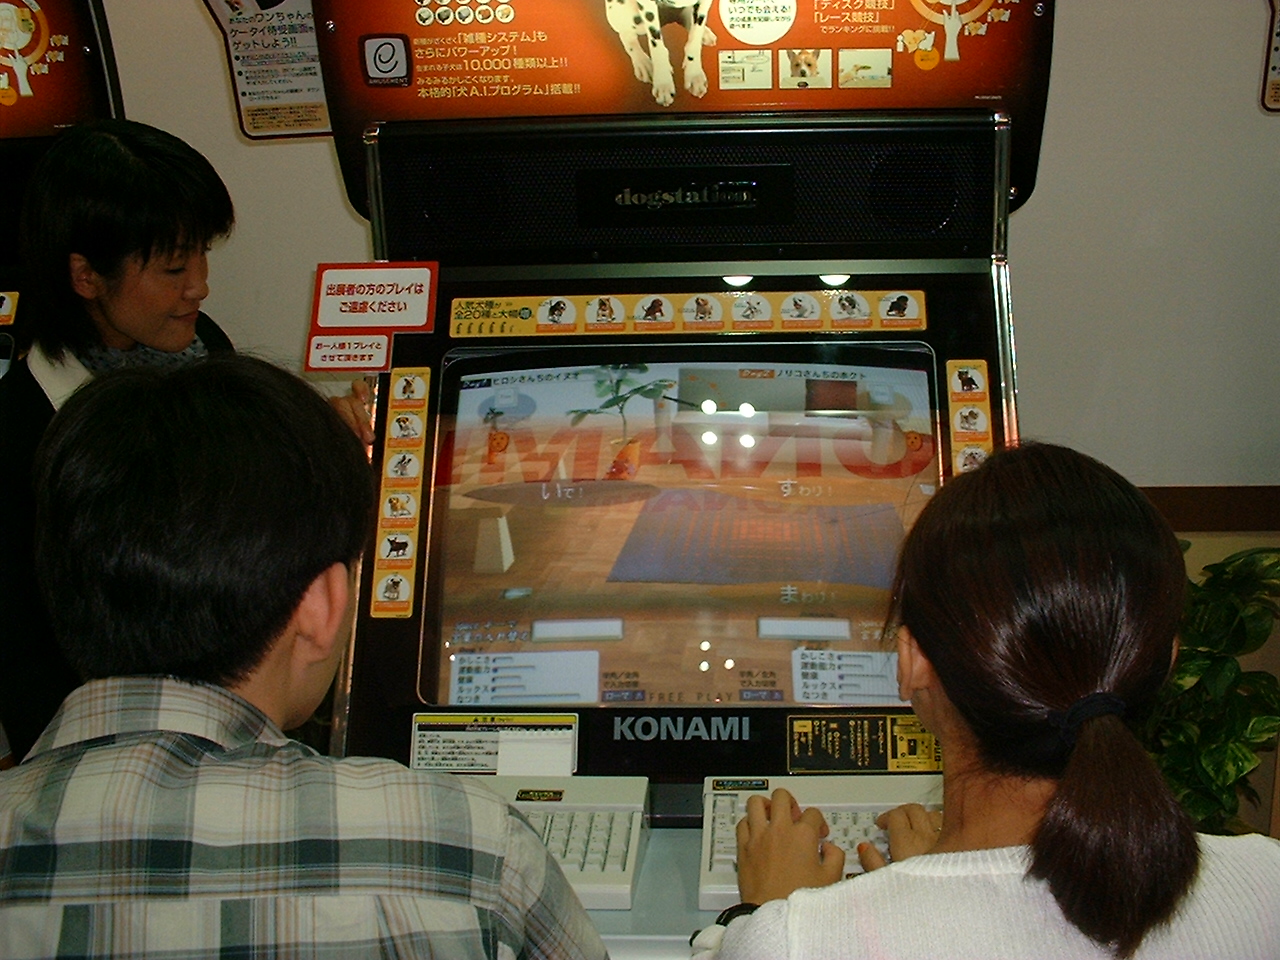 a closer view of the game shows people typing on keyboards and on-screen menus